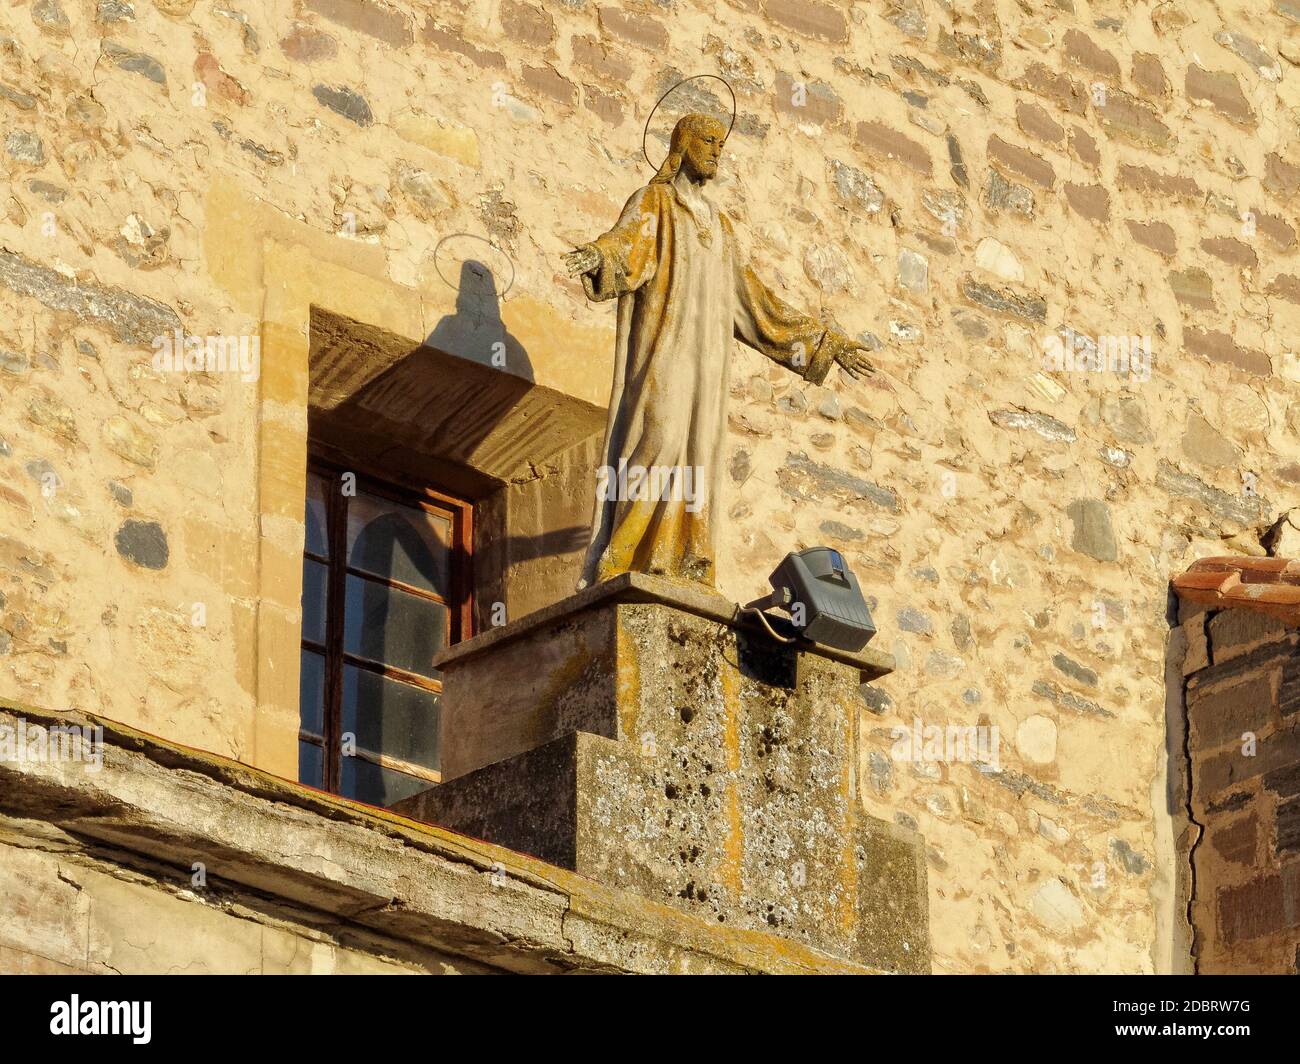 Statue on the facade of the Church of San Pedro on the Main Square (Plaza Mayor) - Belorado, Castile and León, Spain Stock Photo